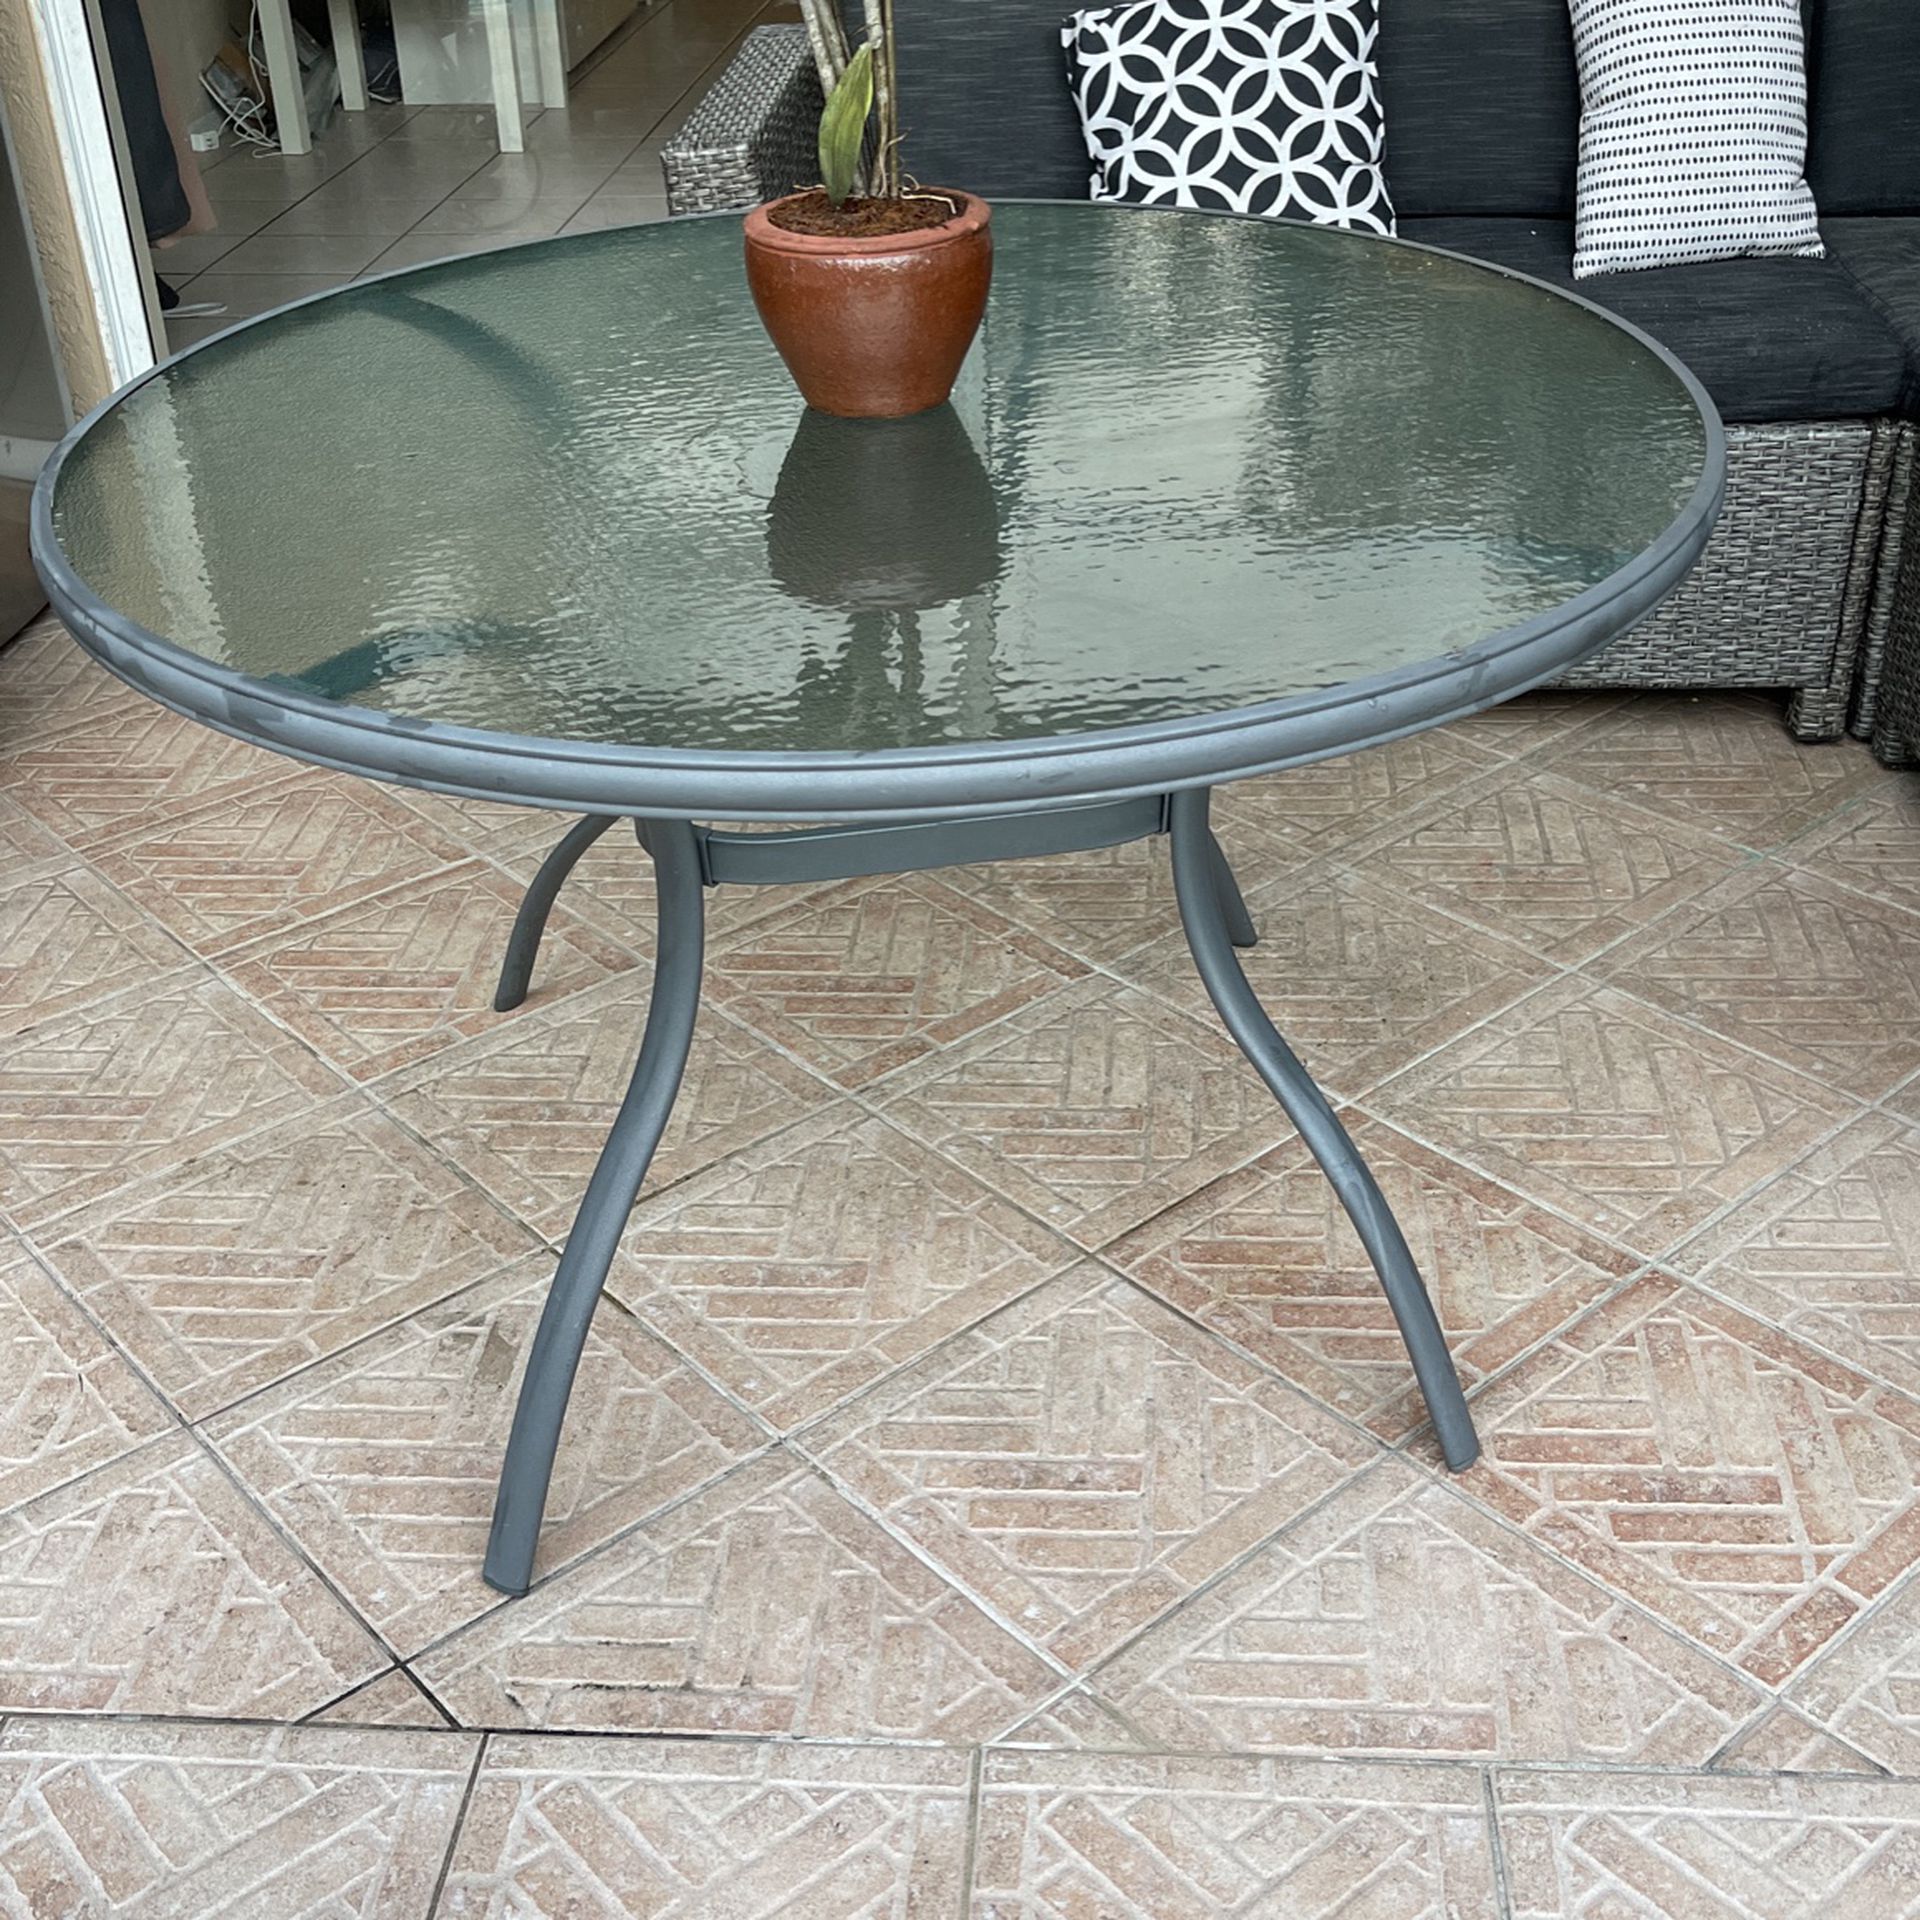 Patio Table Bought Few Months Ago ,only The Table For Sale